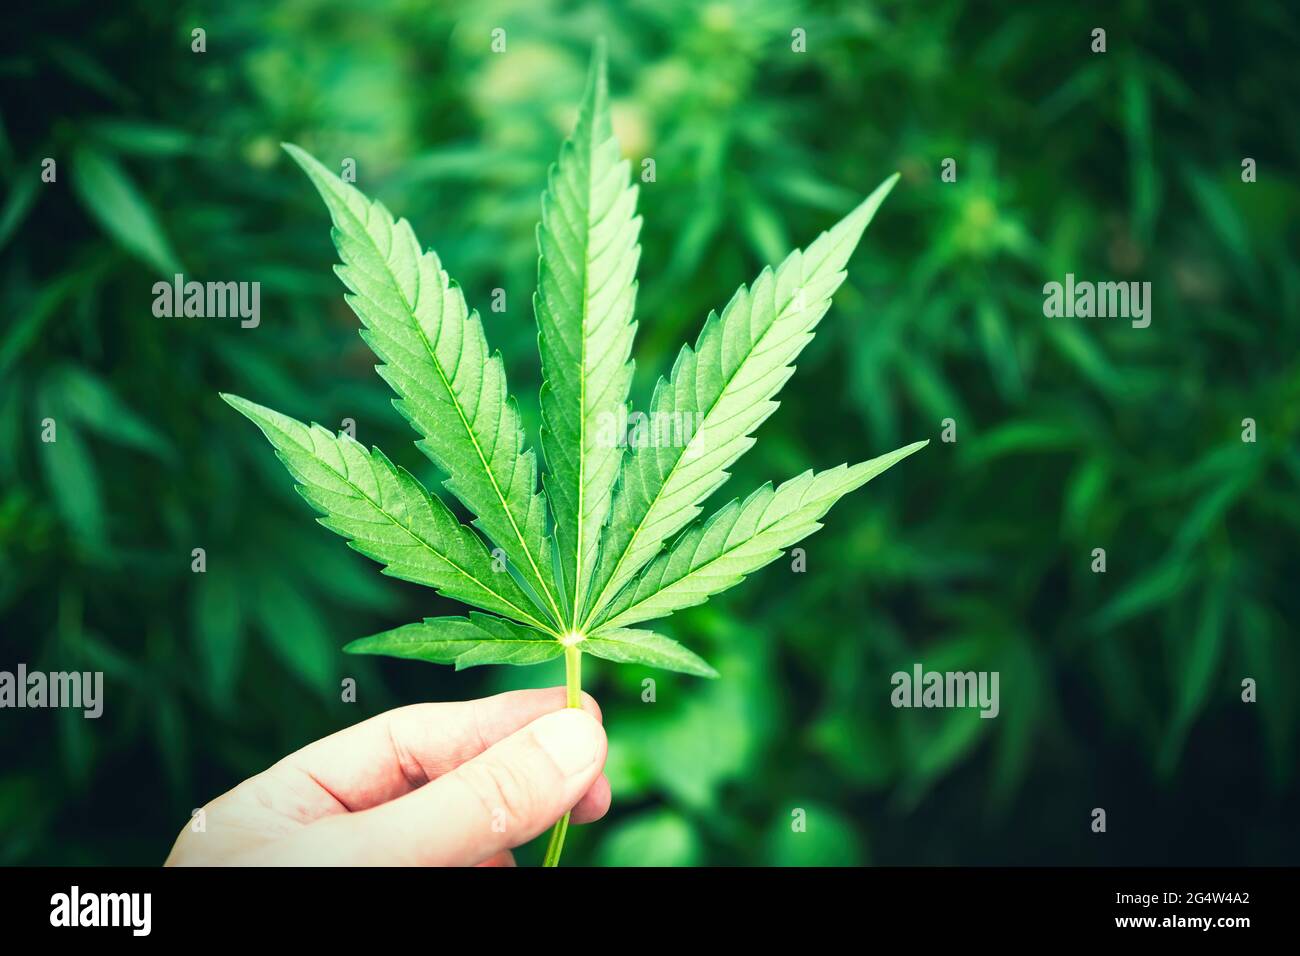 Human hand holding Marijuana Leaf from Medical Cannabis or CBD Hemp plant on blurred dark green foliage background. BIO products and back to the natur Stock Photo